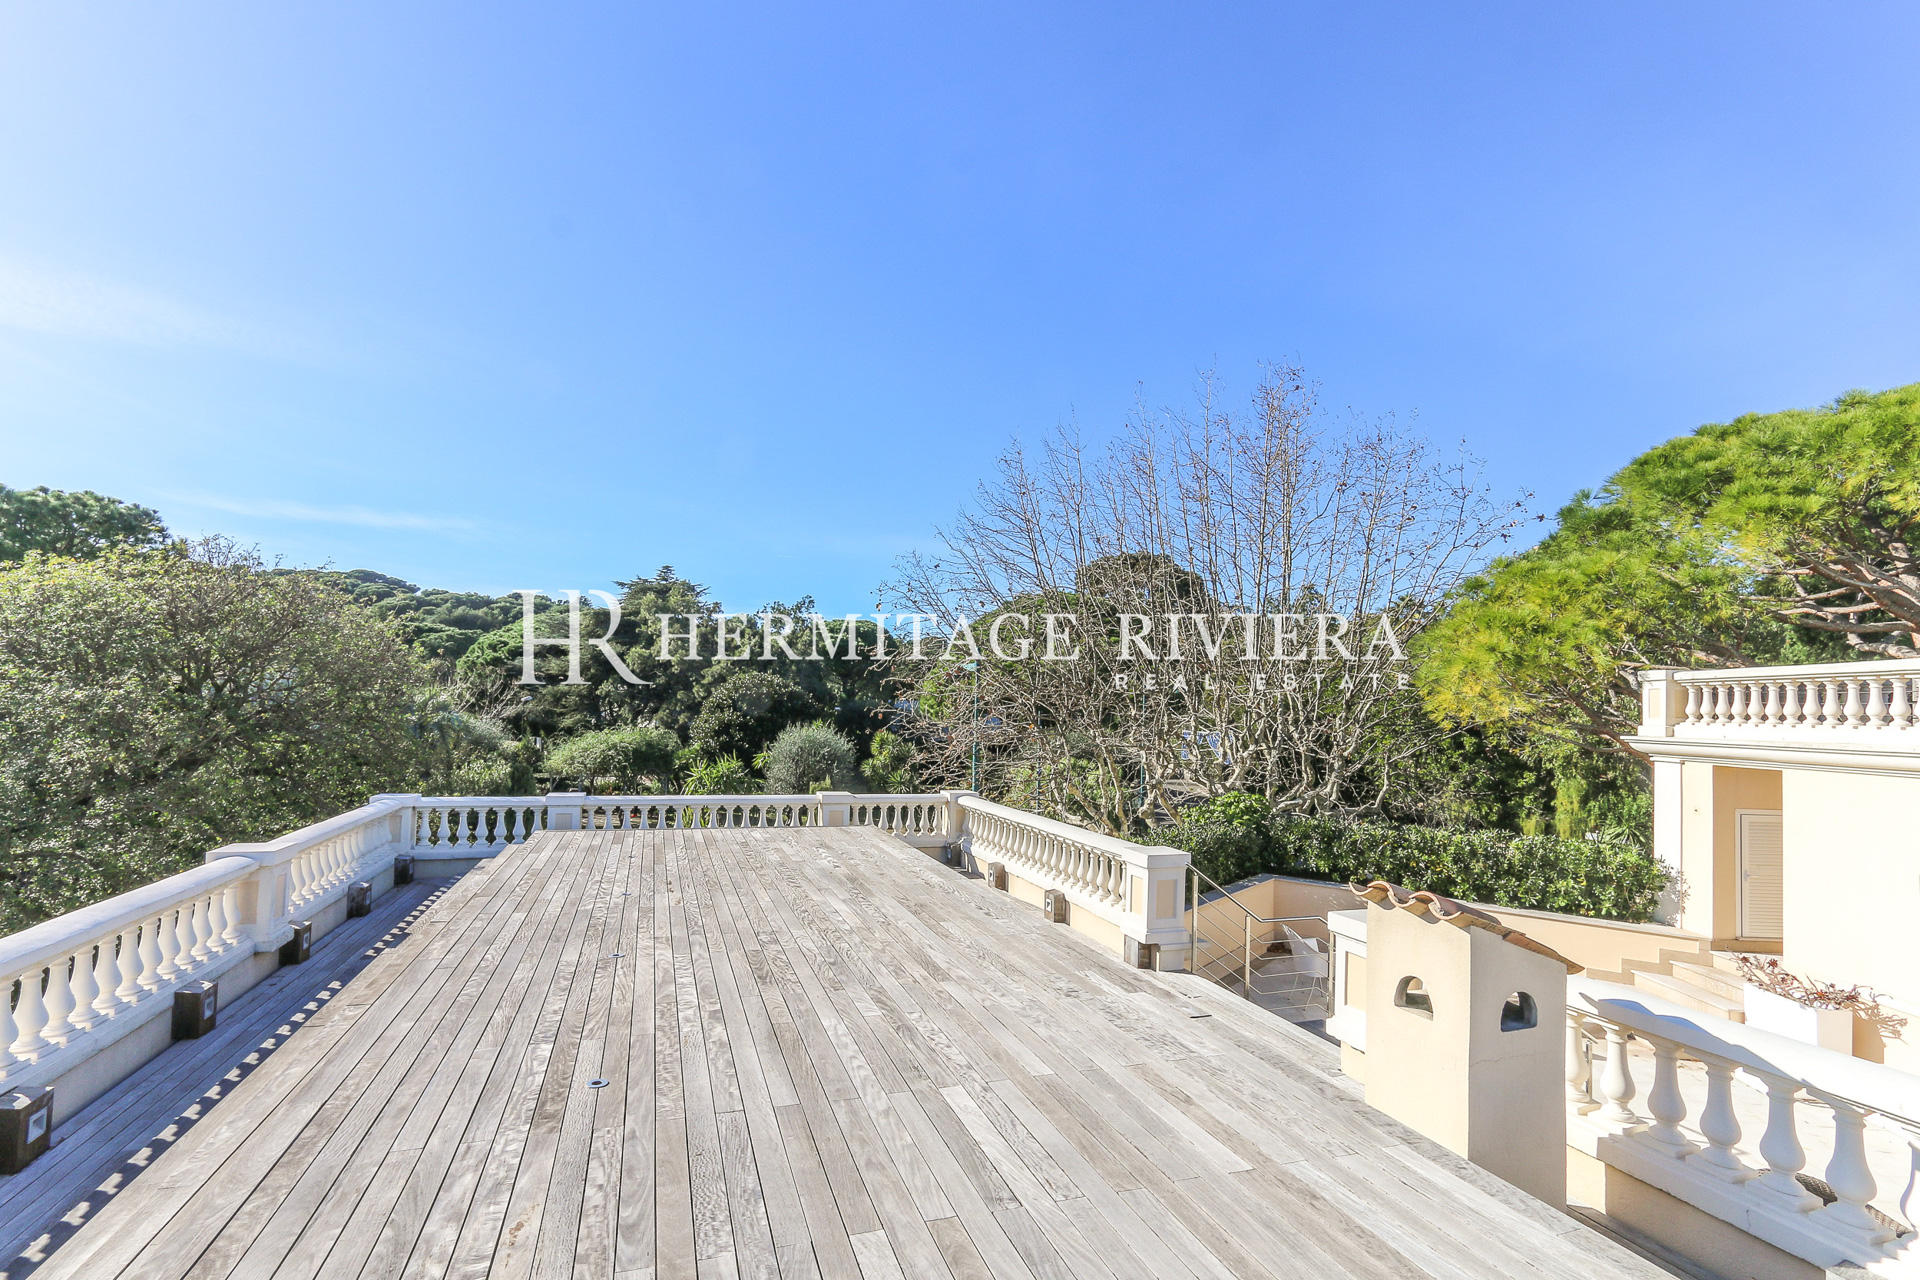 Superb villa close to the village with panoramic views (image 22)